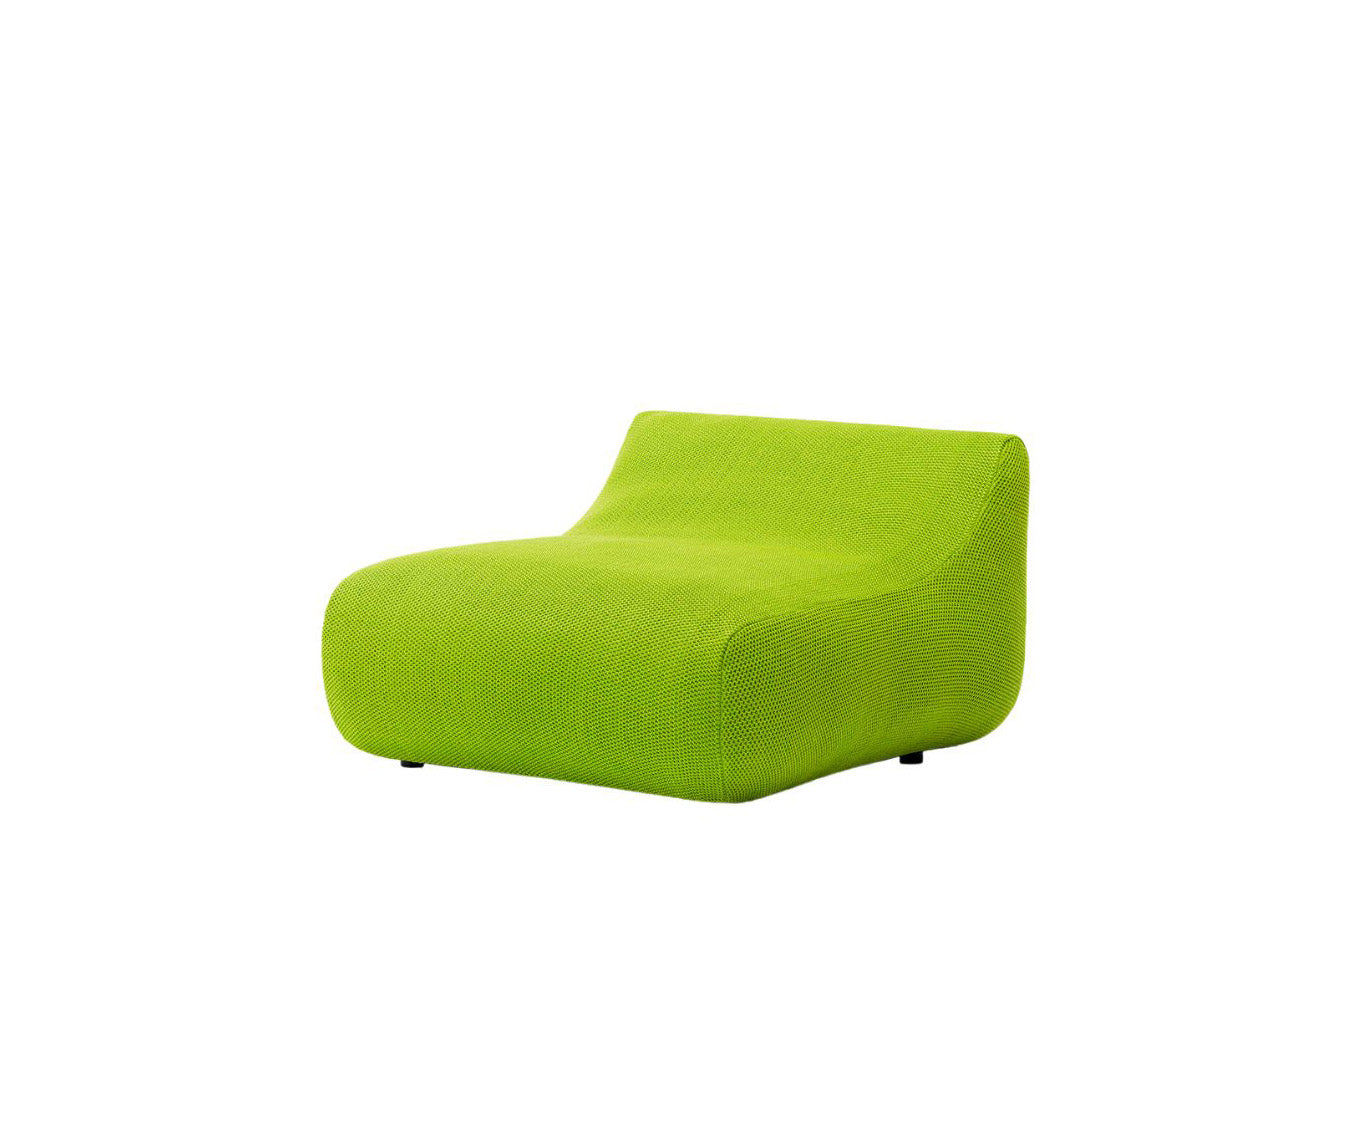 Float On Outdoor Lounge Chair Paola Lenti 